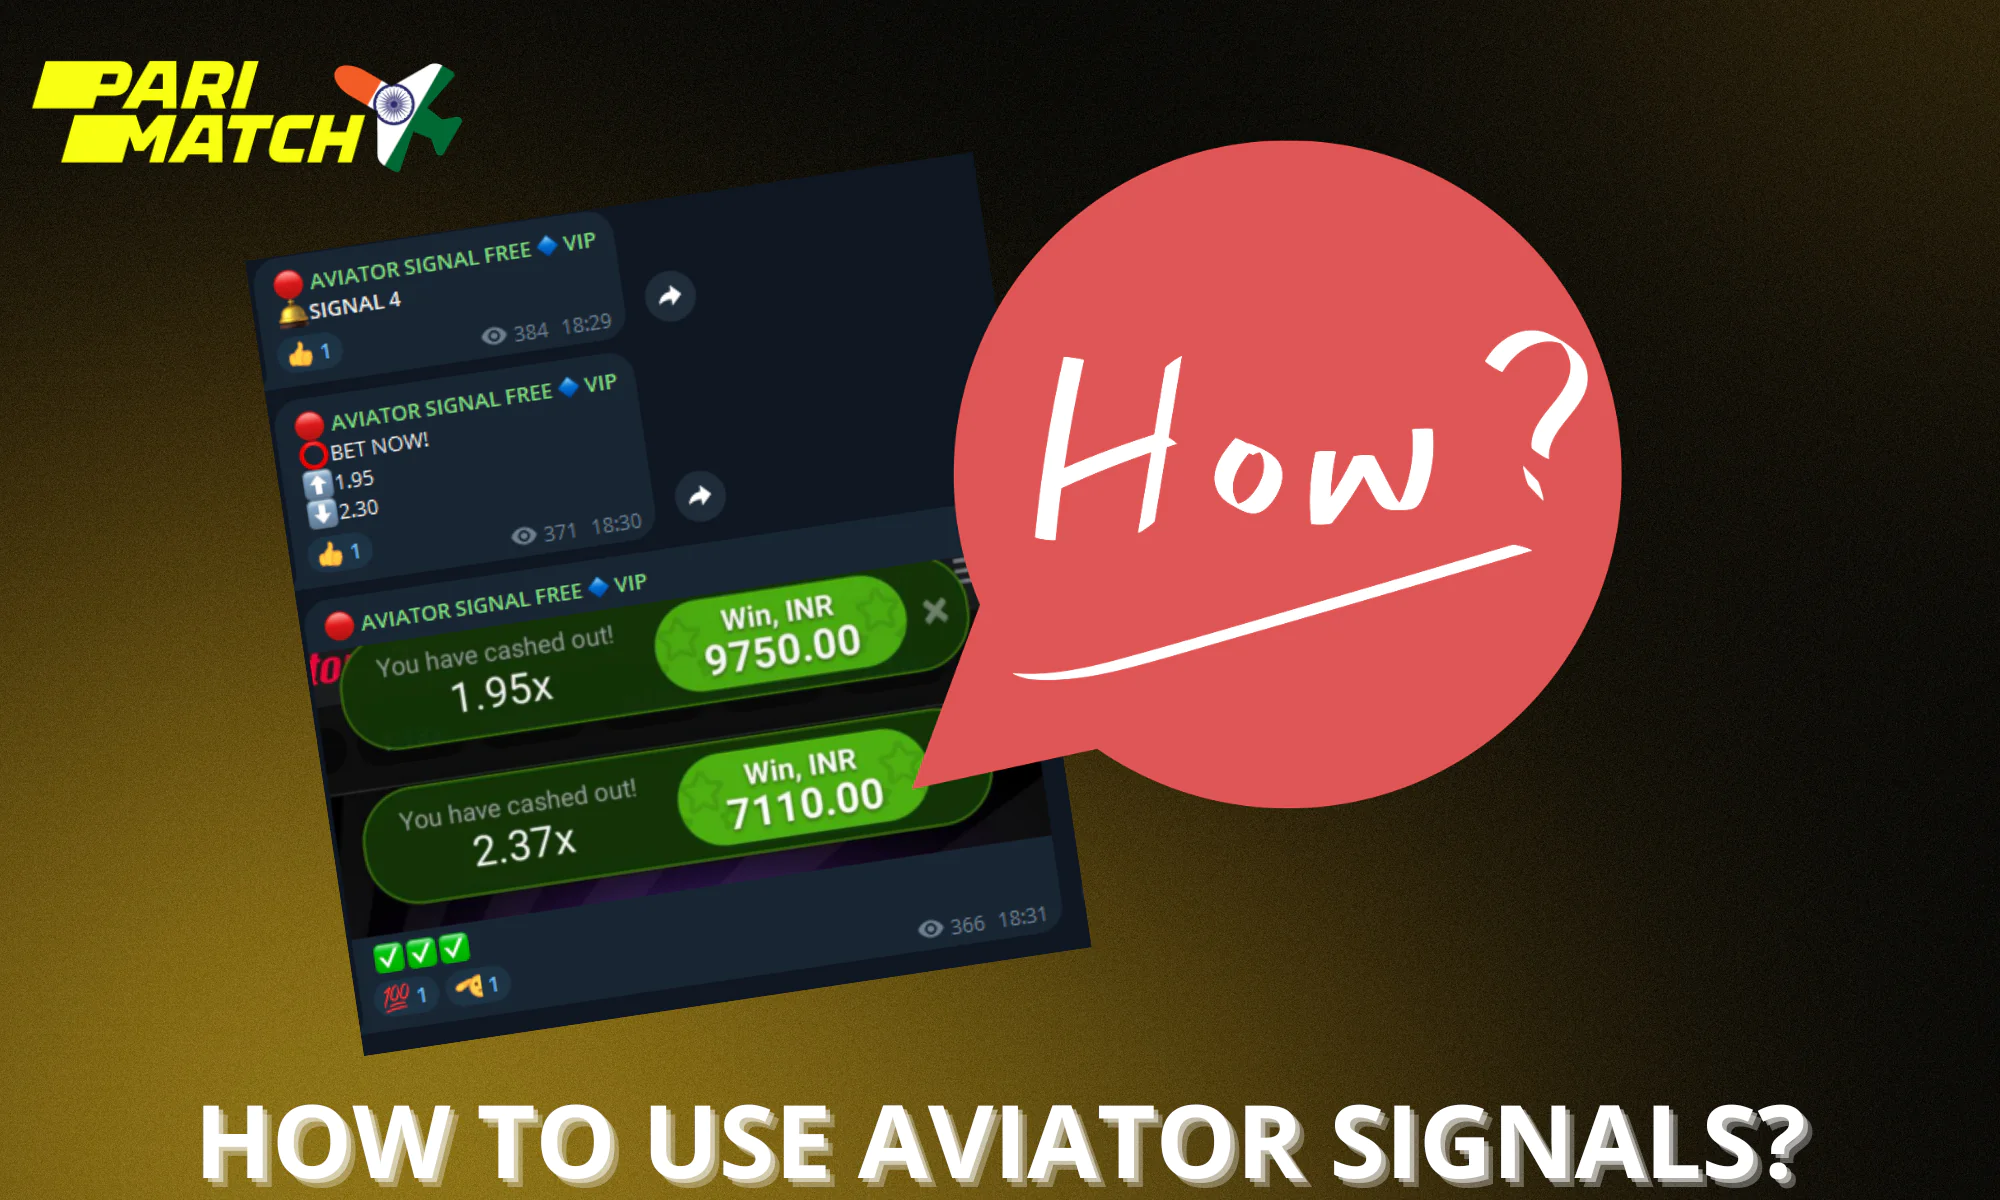 Step-by-step instructions on how to start using Aviator Signals